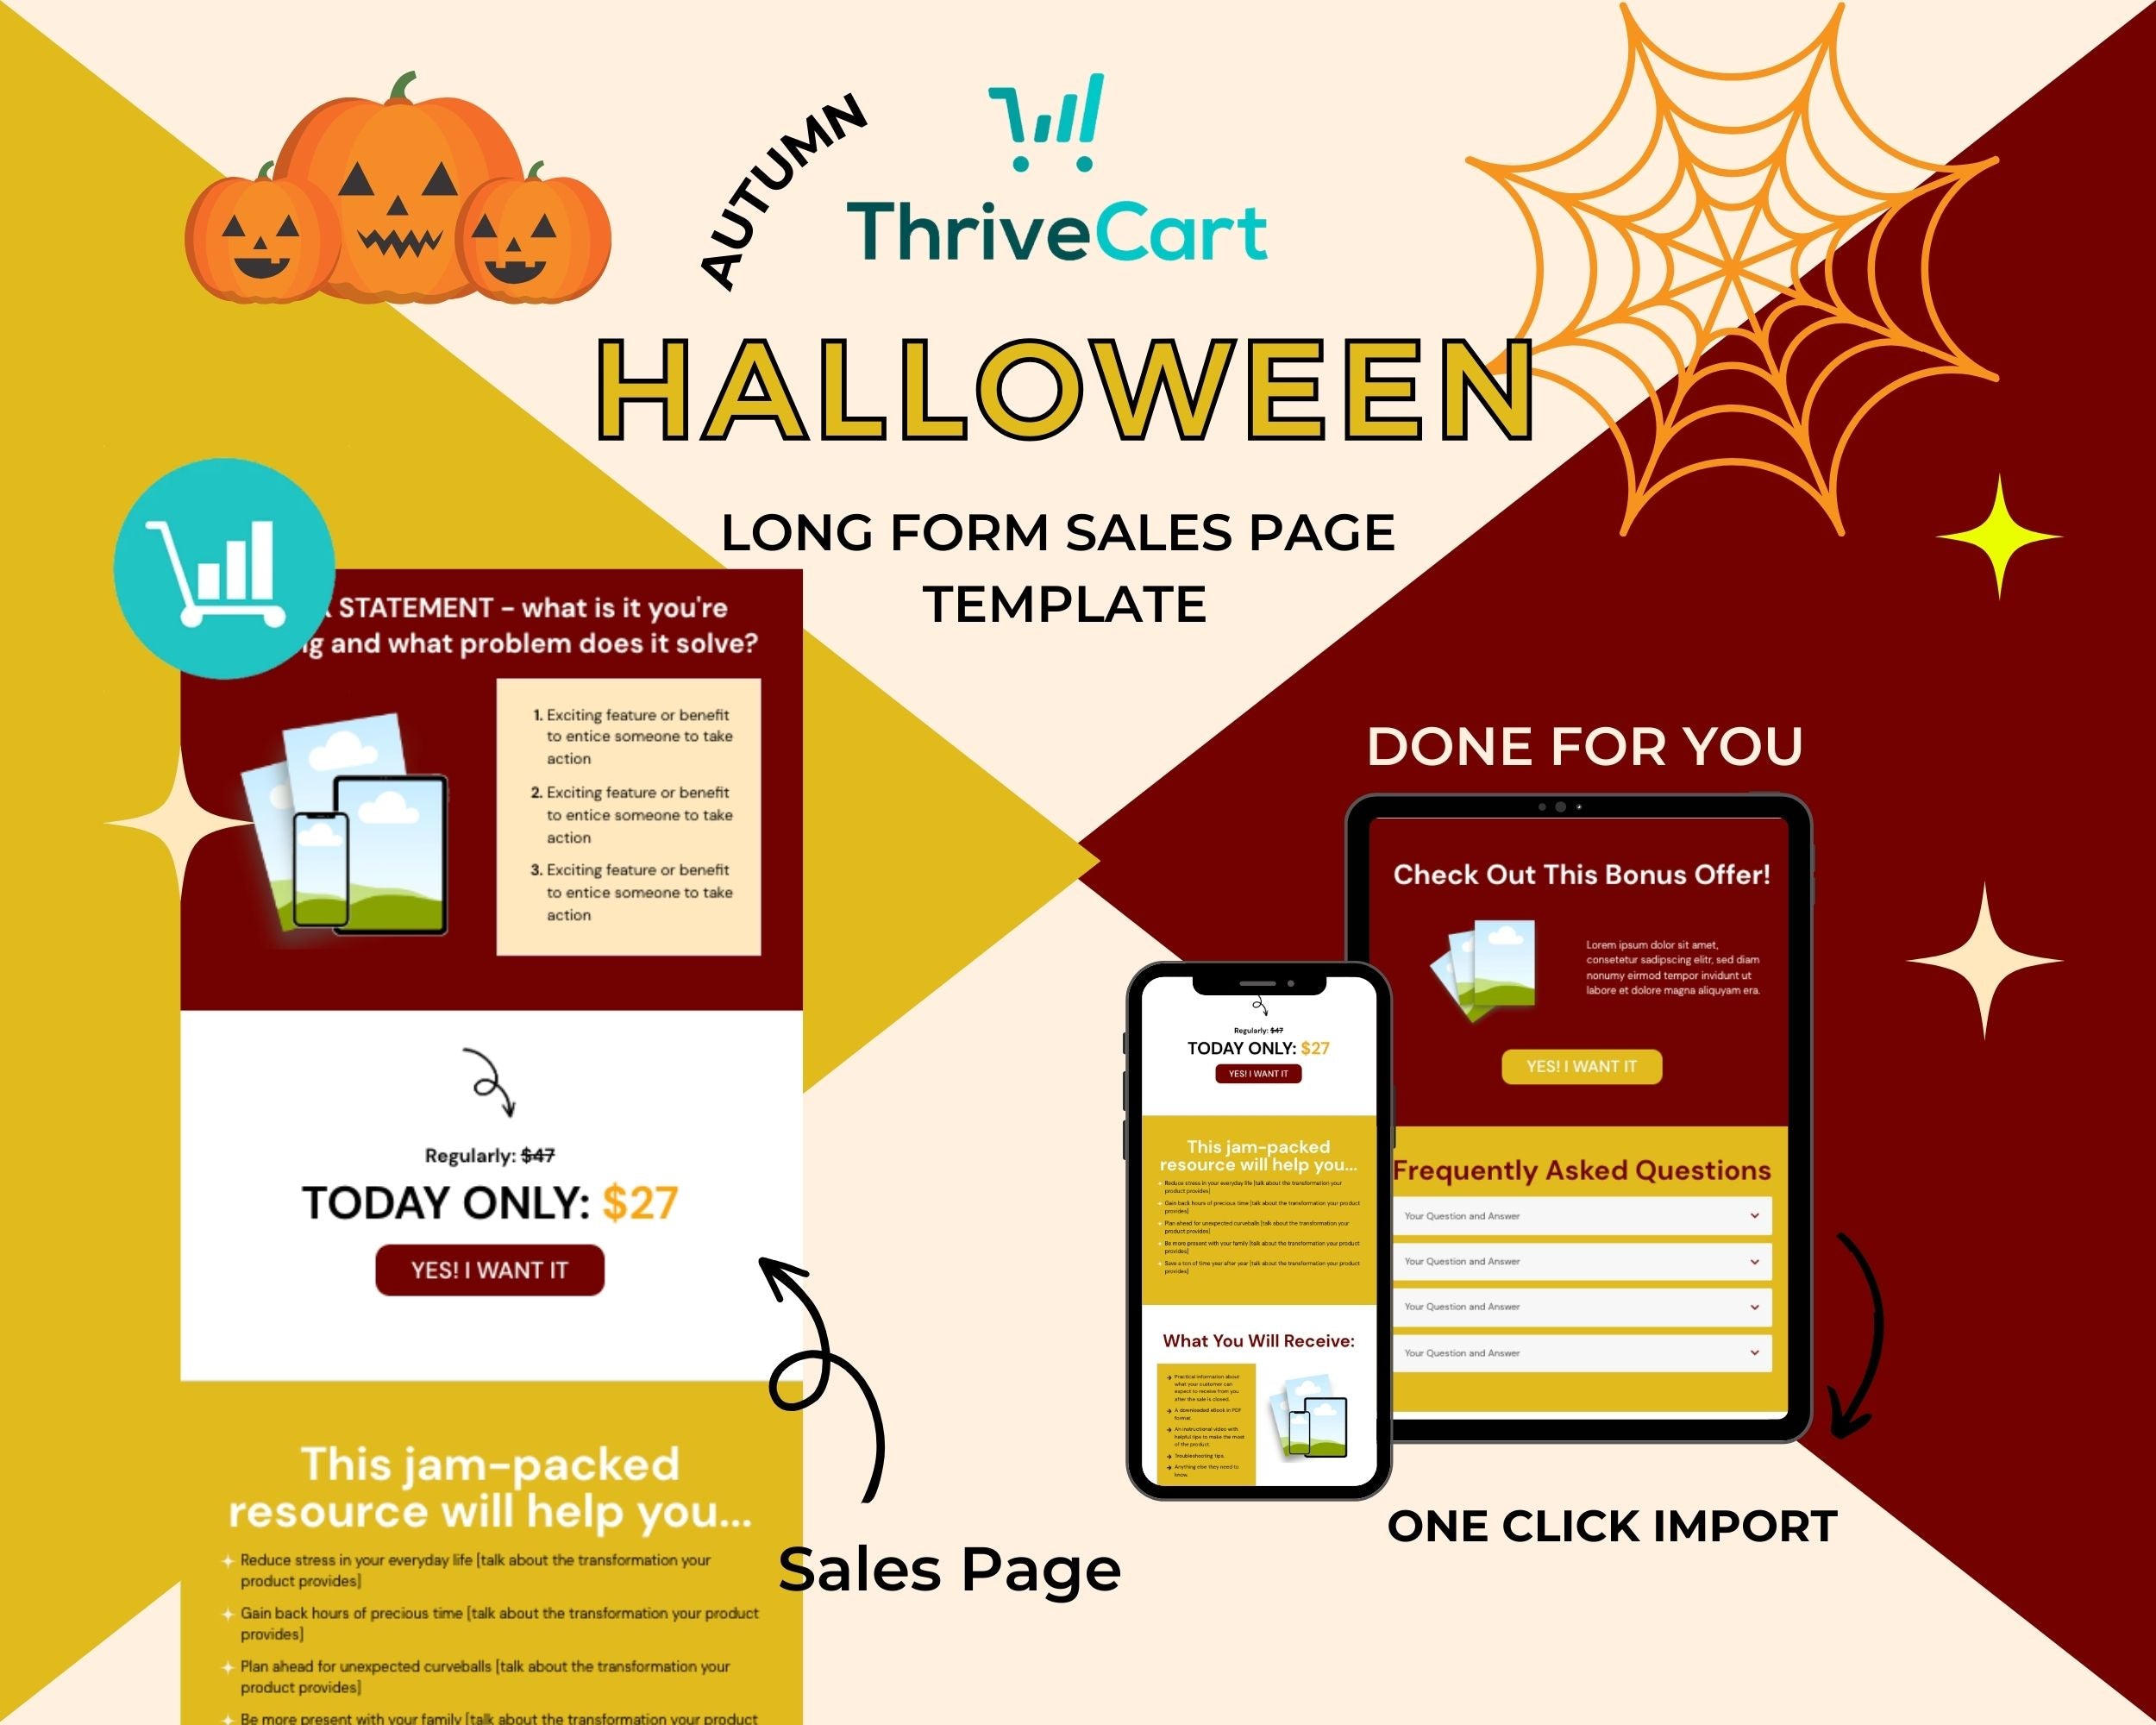 Animated Halloween Sales Page Template in ThriveCart